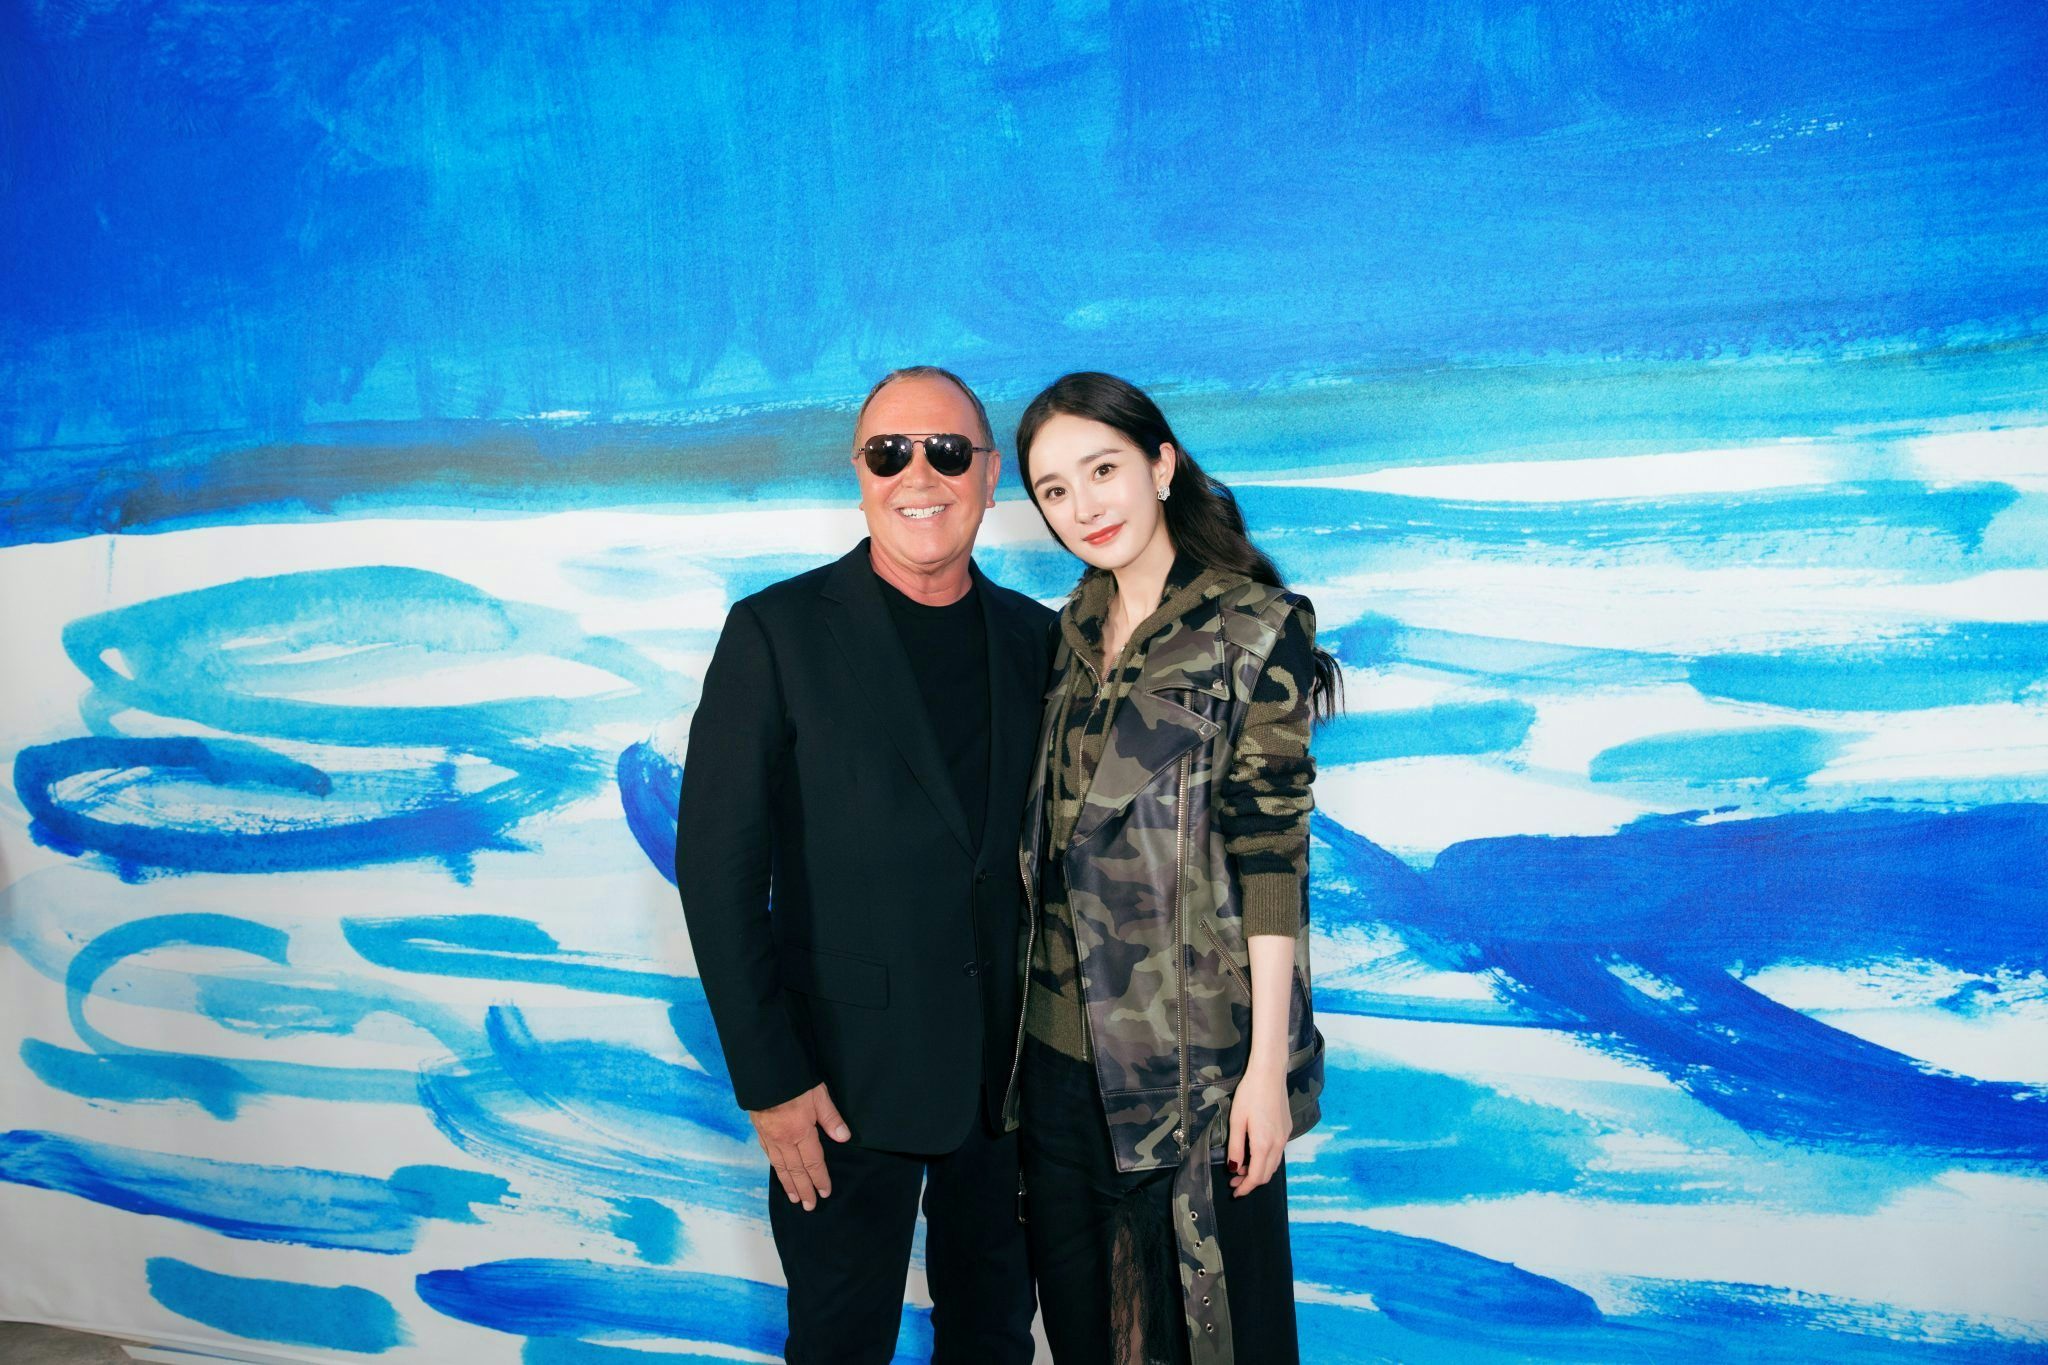 How Michael Kors Learned to Speak Chinese—And Sparked NYFW Sales